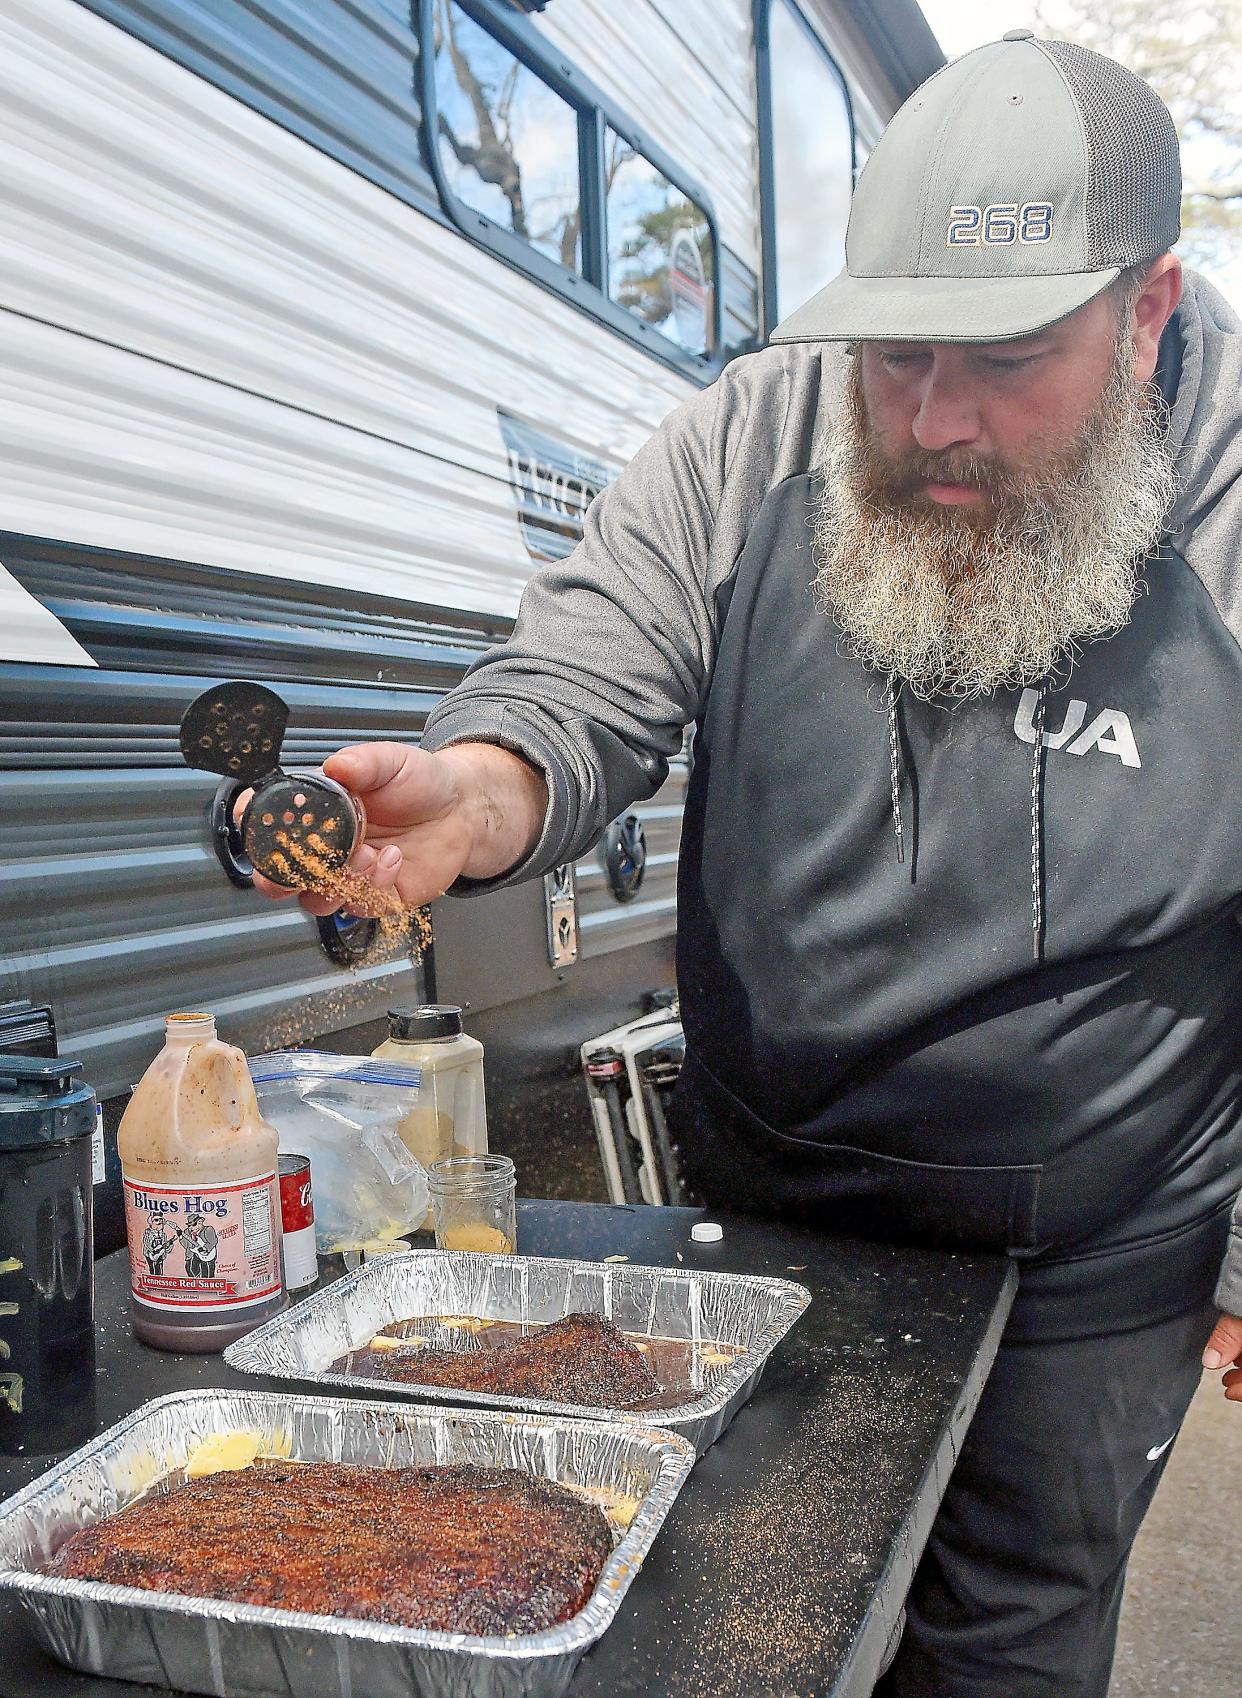 Danny Vohs seasons and wraps competition brisket Nov. 13, 2022, during the Kansas City Barbeque Society World Invitational Championship at Noccalula Falls Park in Gadsden. Vohs is part of the Coming in Hot BBQ team from St. Louis.